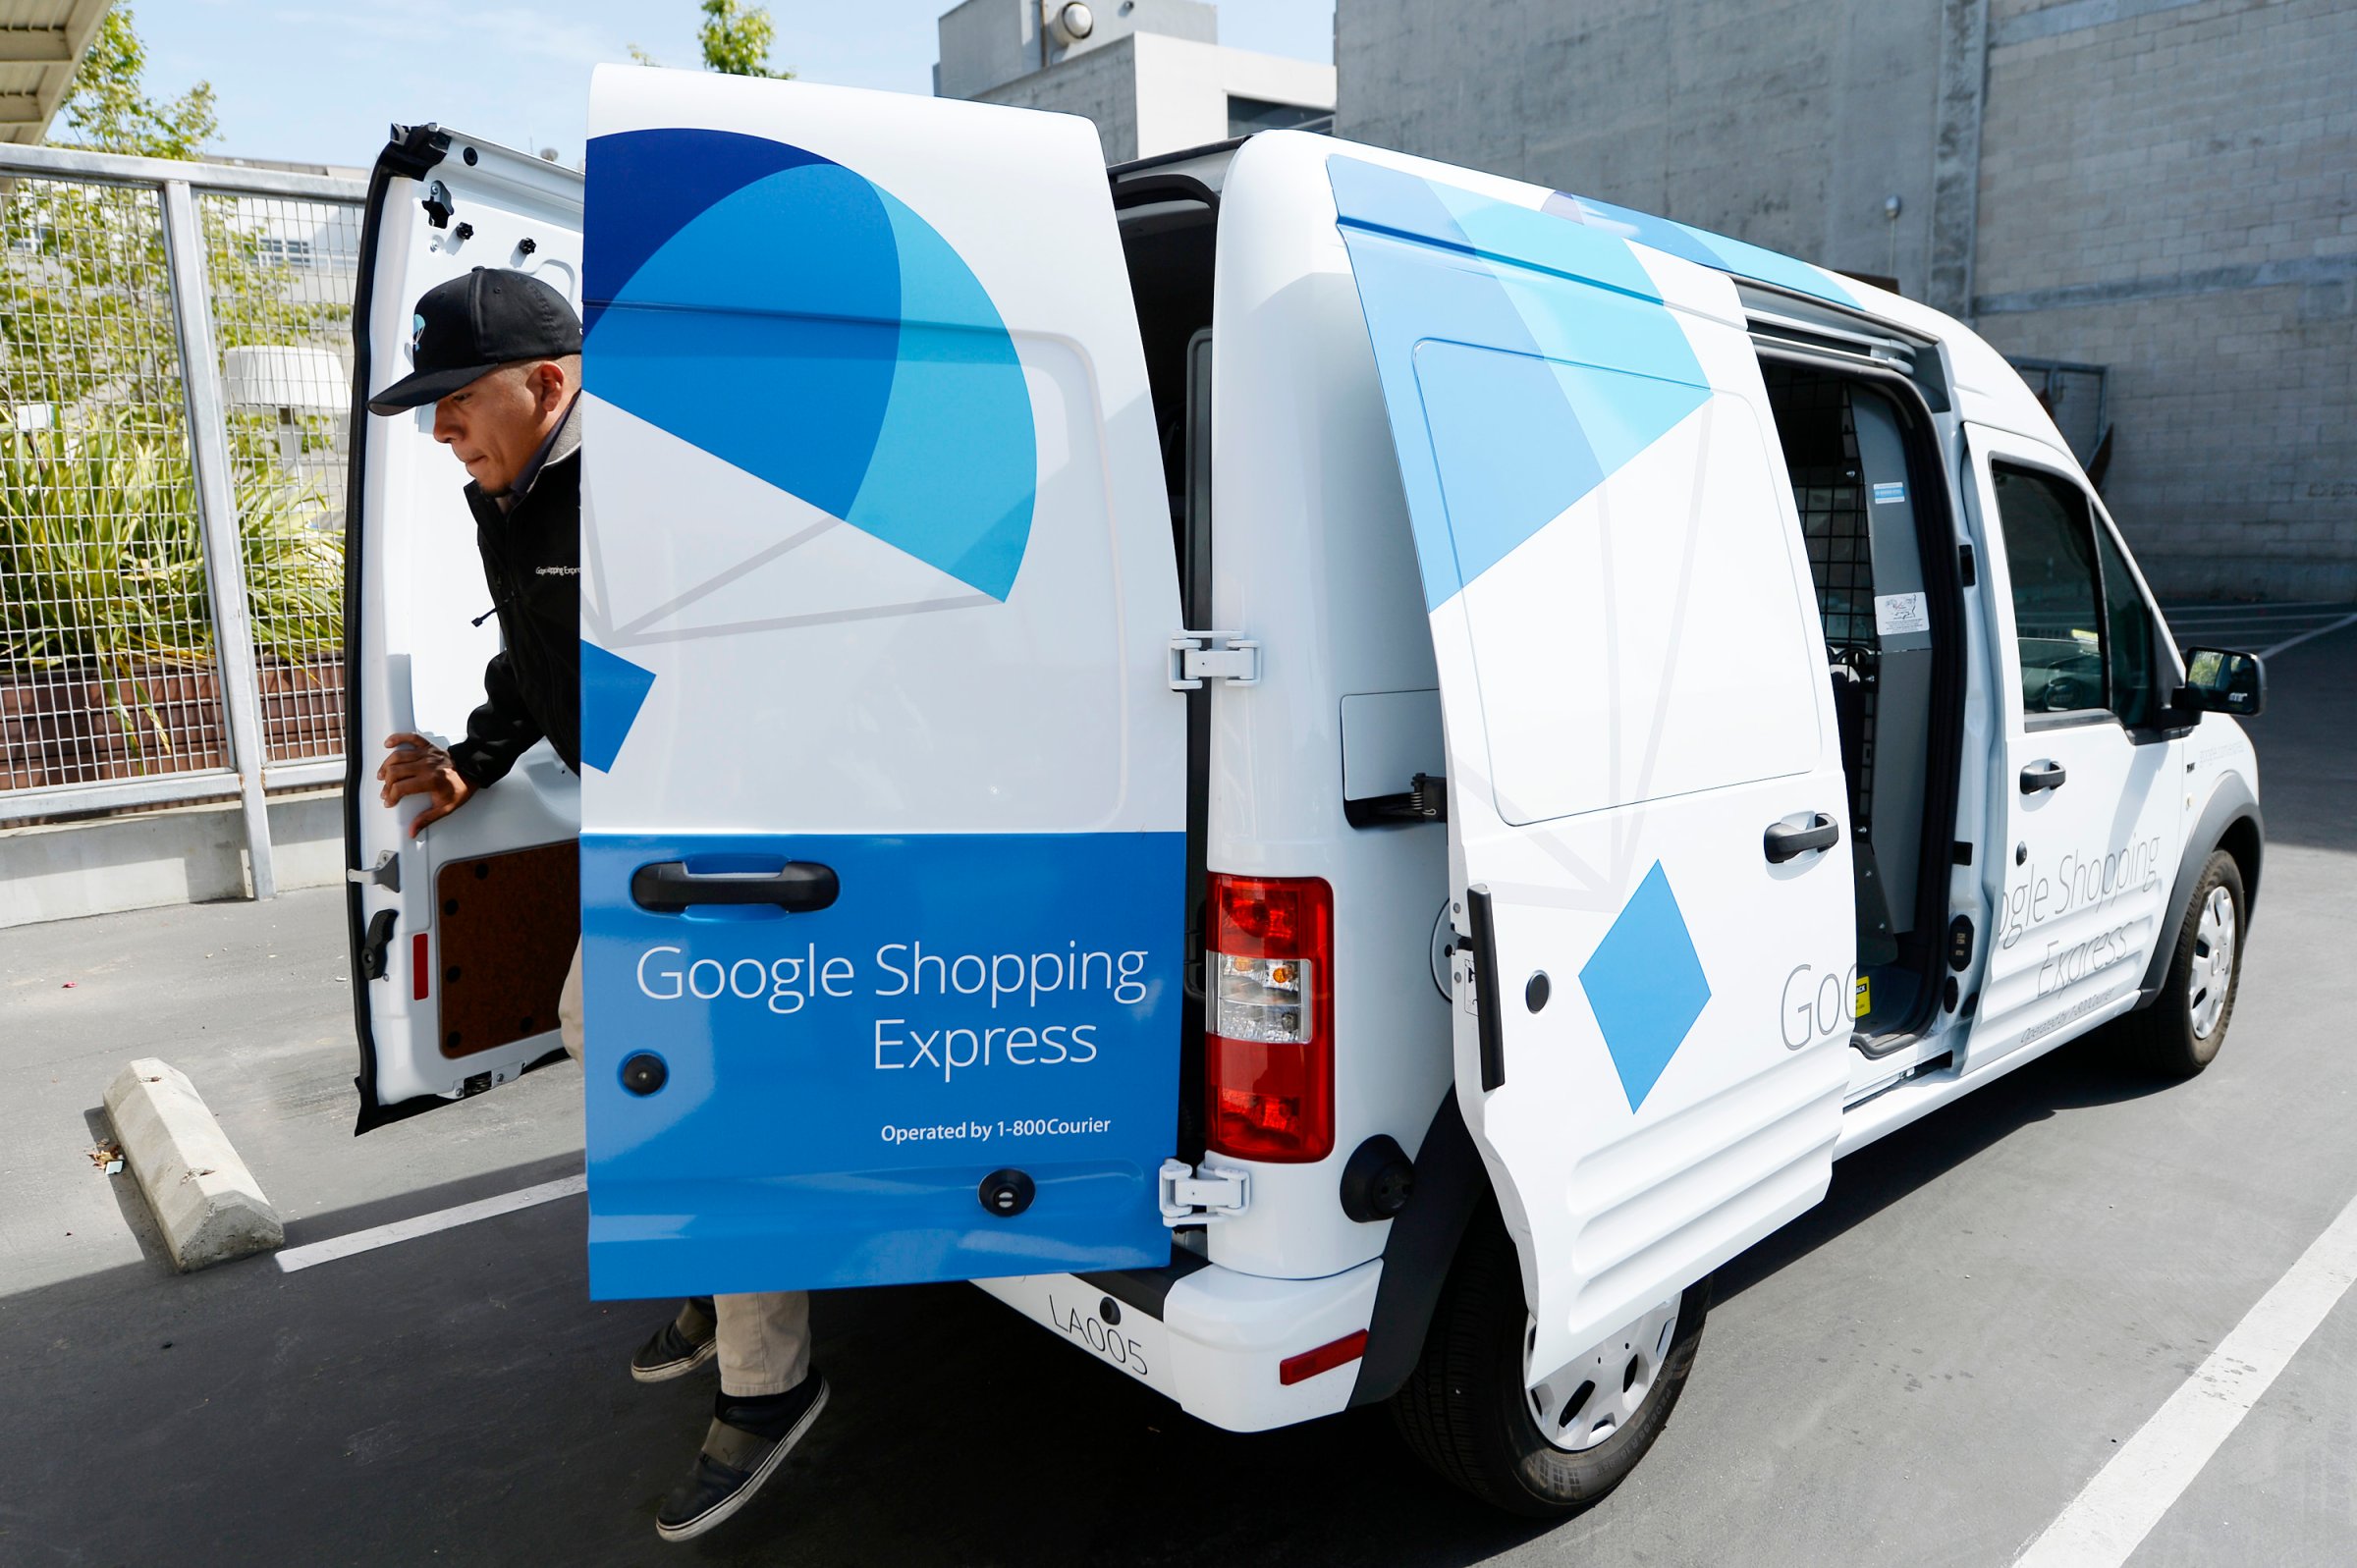 A Google Shopping Express van is seen at Google headquarters on May 5, 2014, in Los Angeles, California.